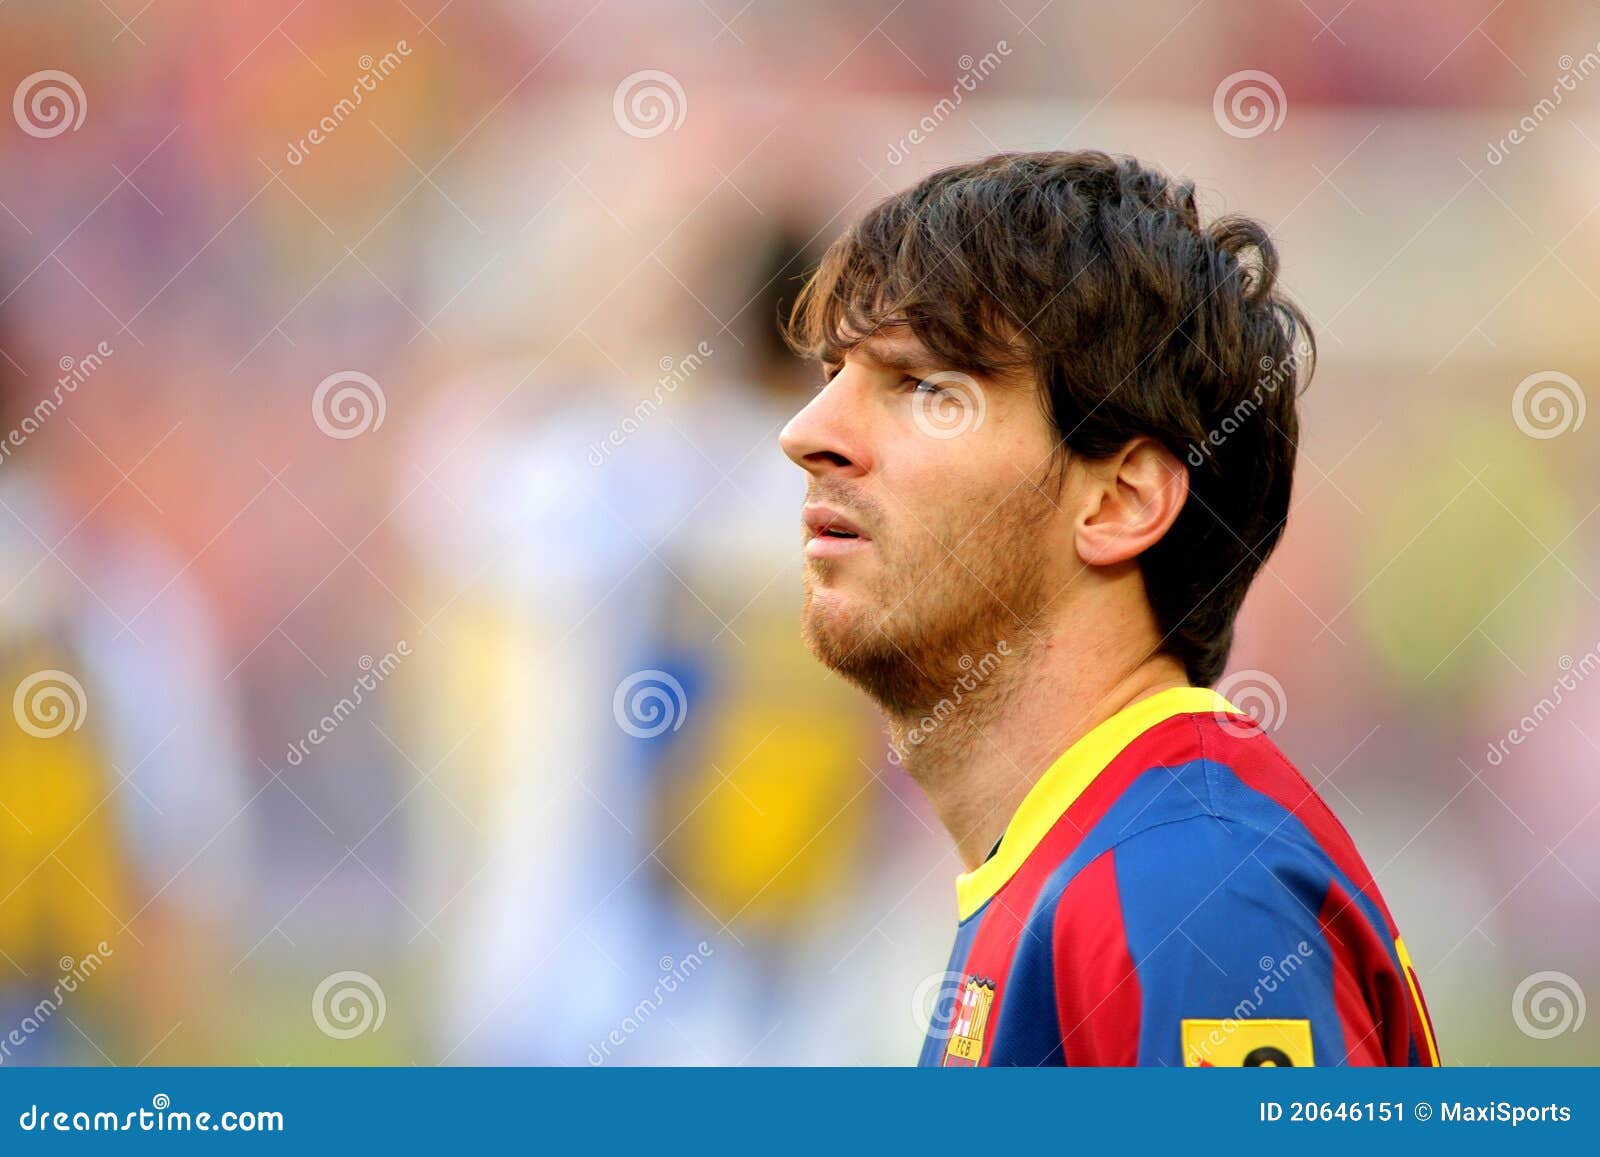 Lionel Messi's Top 10 Most Iconic Hairstyles | Futebol, Fotos